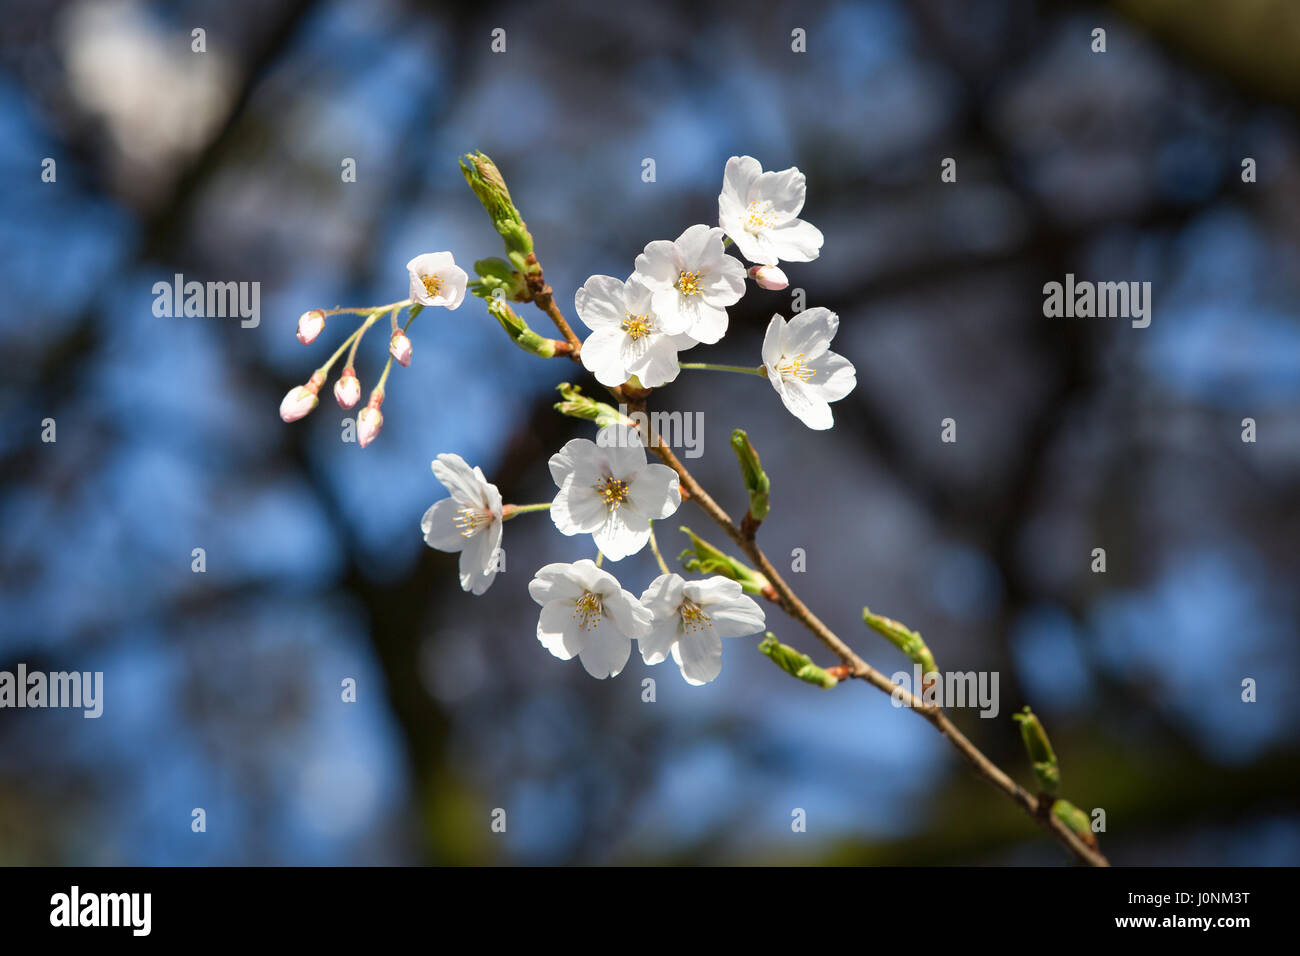 Cherry tree flower blossoms and some buds on a dark background. Stock Photo